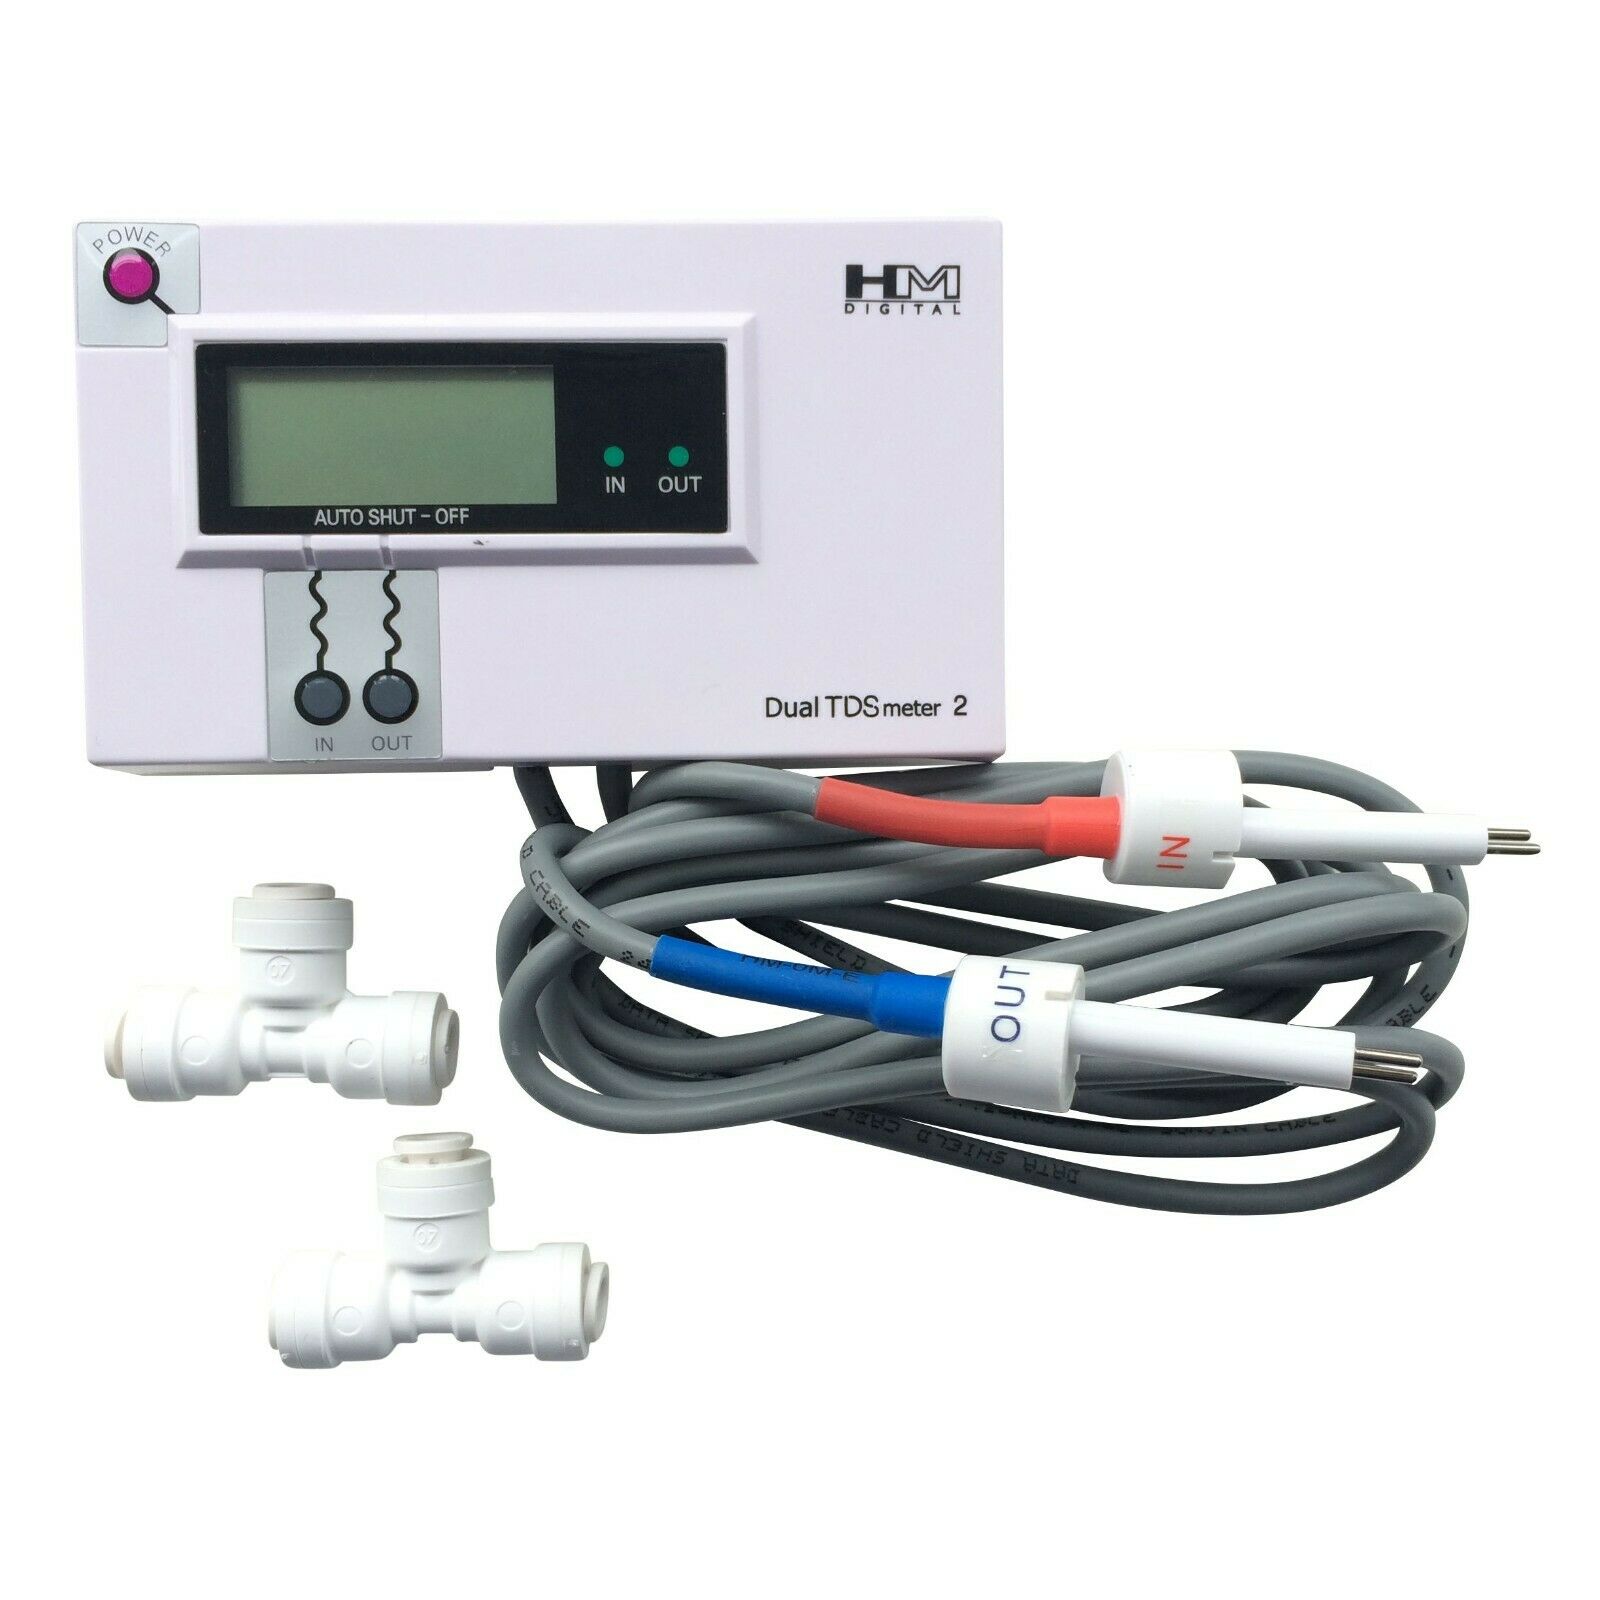 HM Digital DM-2 Dual Inline TDS Meter Monitor Commercial for RO Unit